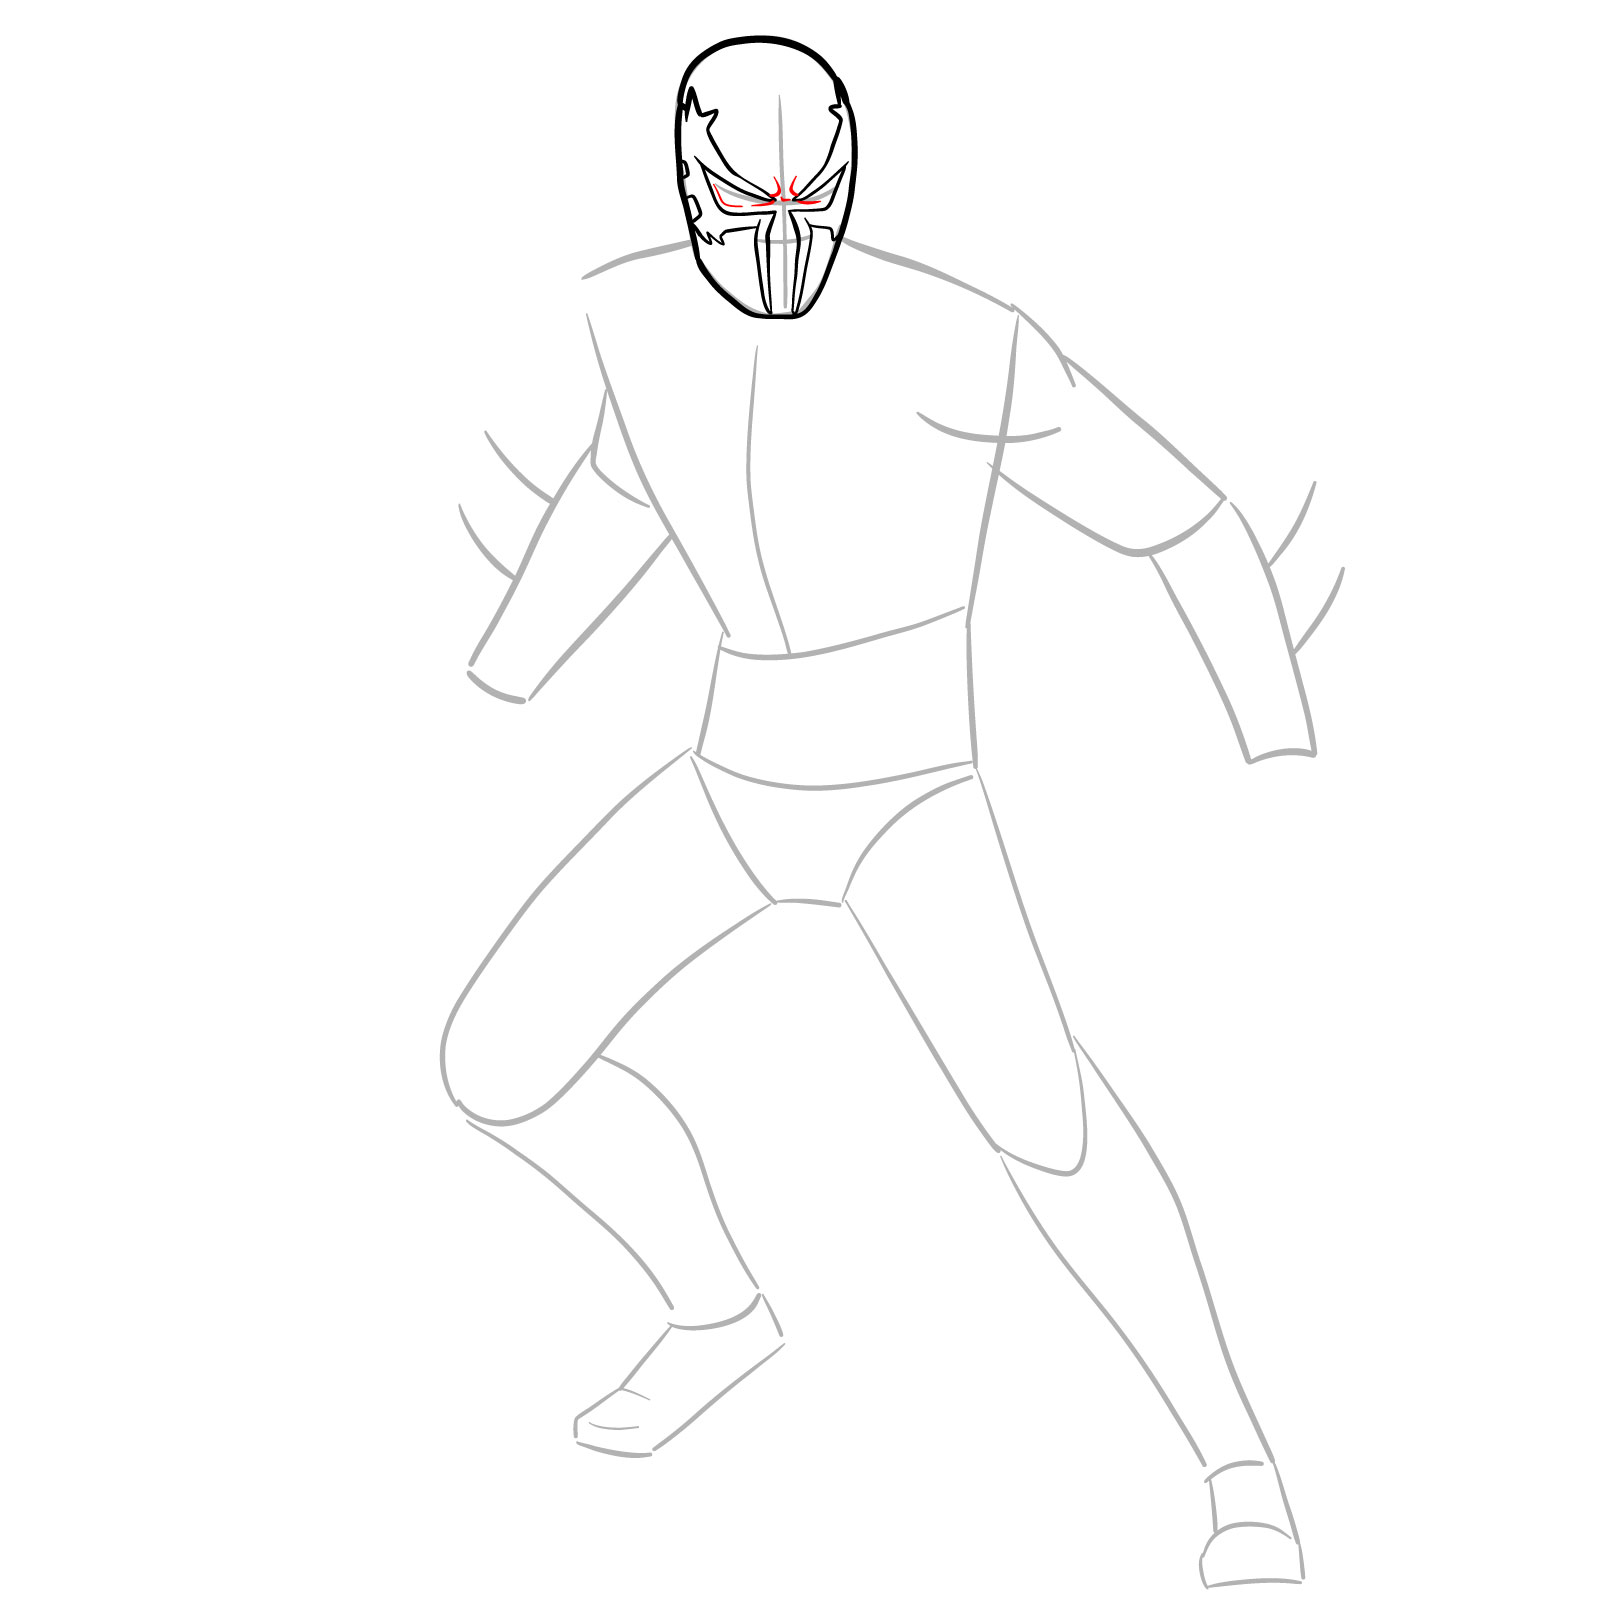 How to draw Spider-Man 2099 - step 10